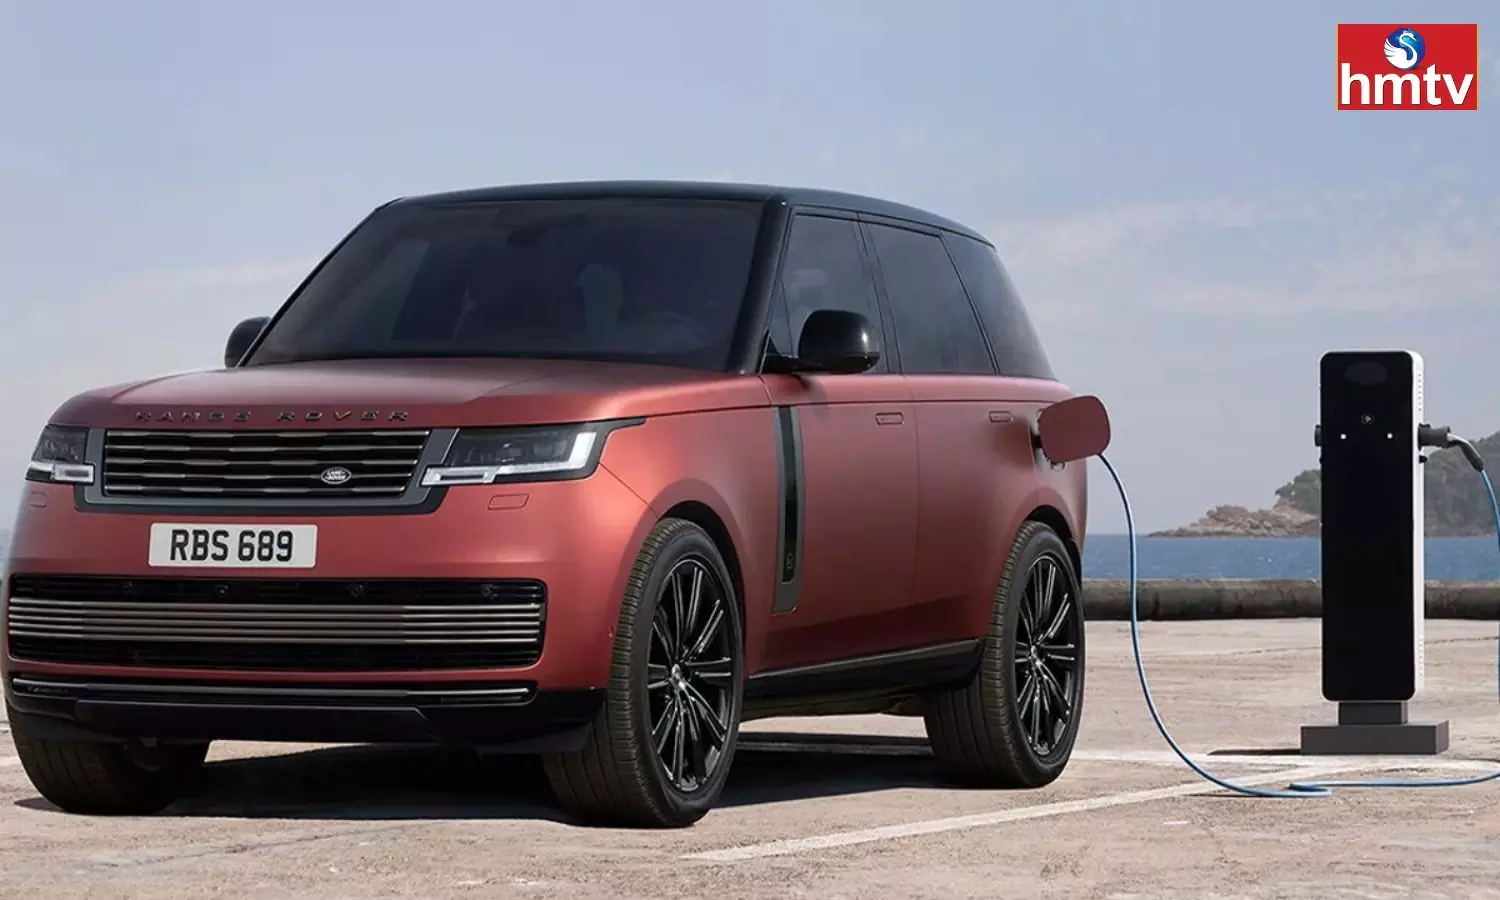 16000 Buyers Booking For Range Rover Electric SUV Before Official Launch Check Feature And Price